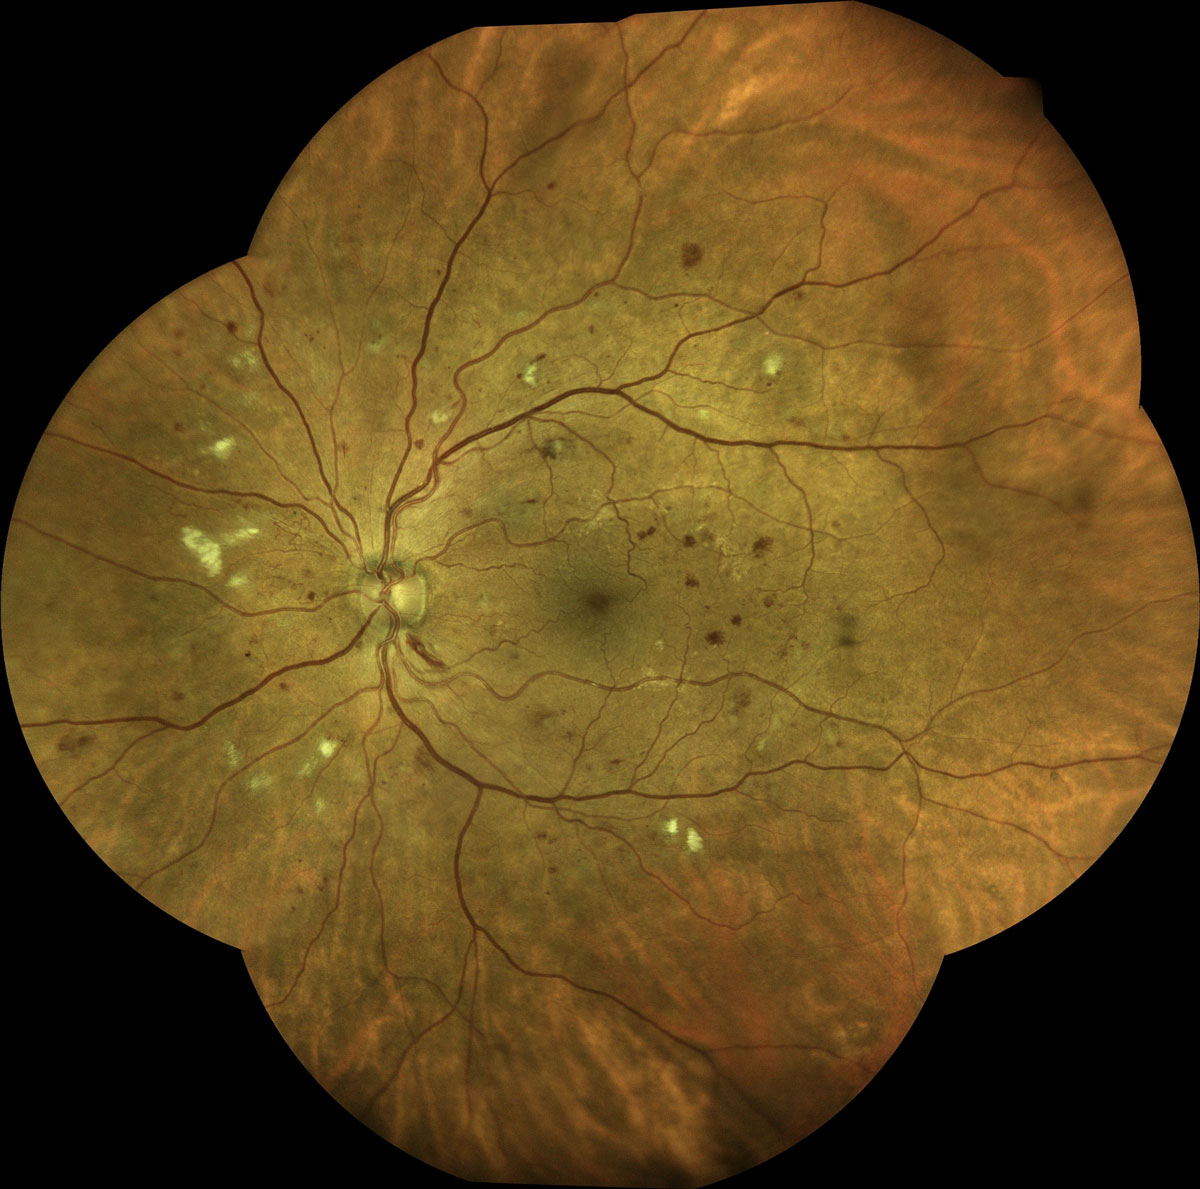 Figure 2. Moderate nonproliferative diabetic retinopathy with microaneurysms, dot/blot hemorrhages, hard exudates, cotton wool spots, and intraretinal microvascular abnormalities. Image courtesy of Steven Ferrucci, OD